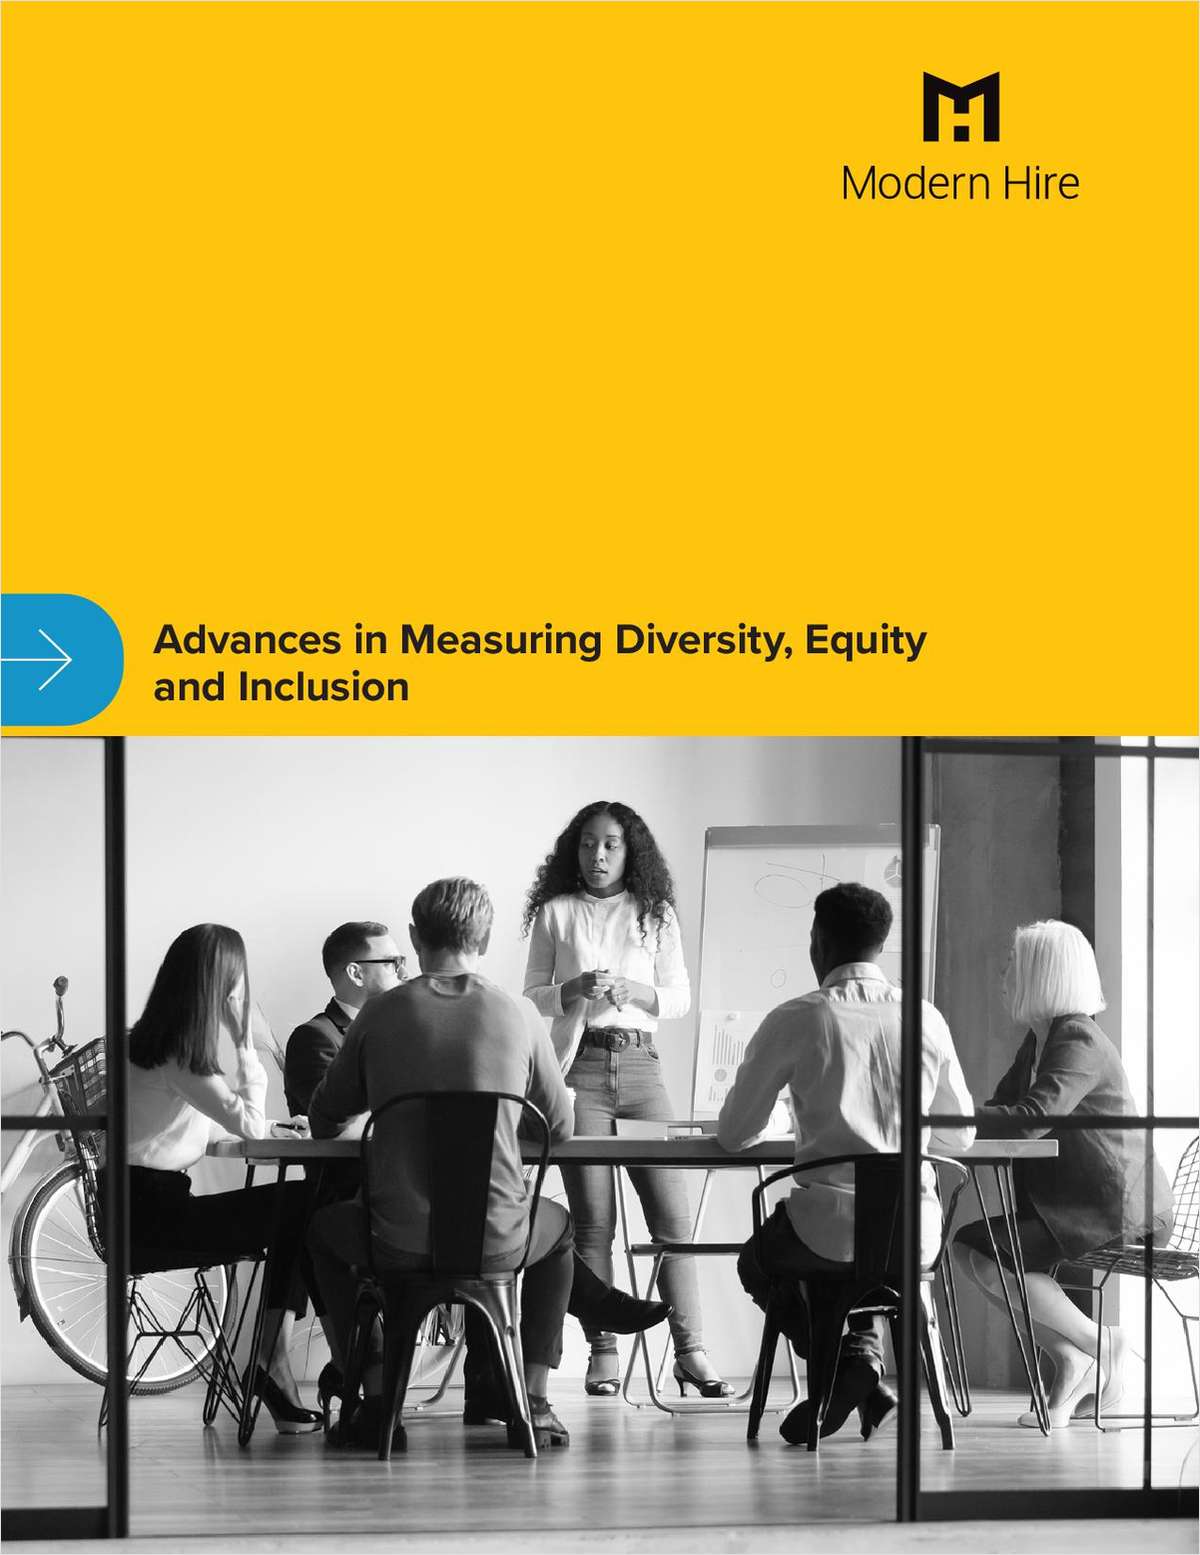 Advances in measuring diversity, equity, and inclusion